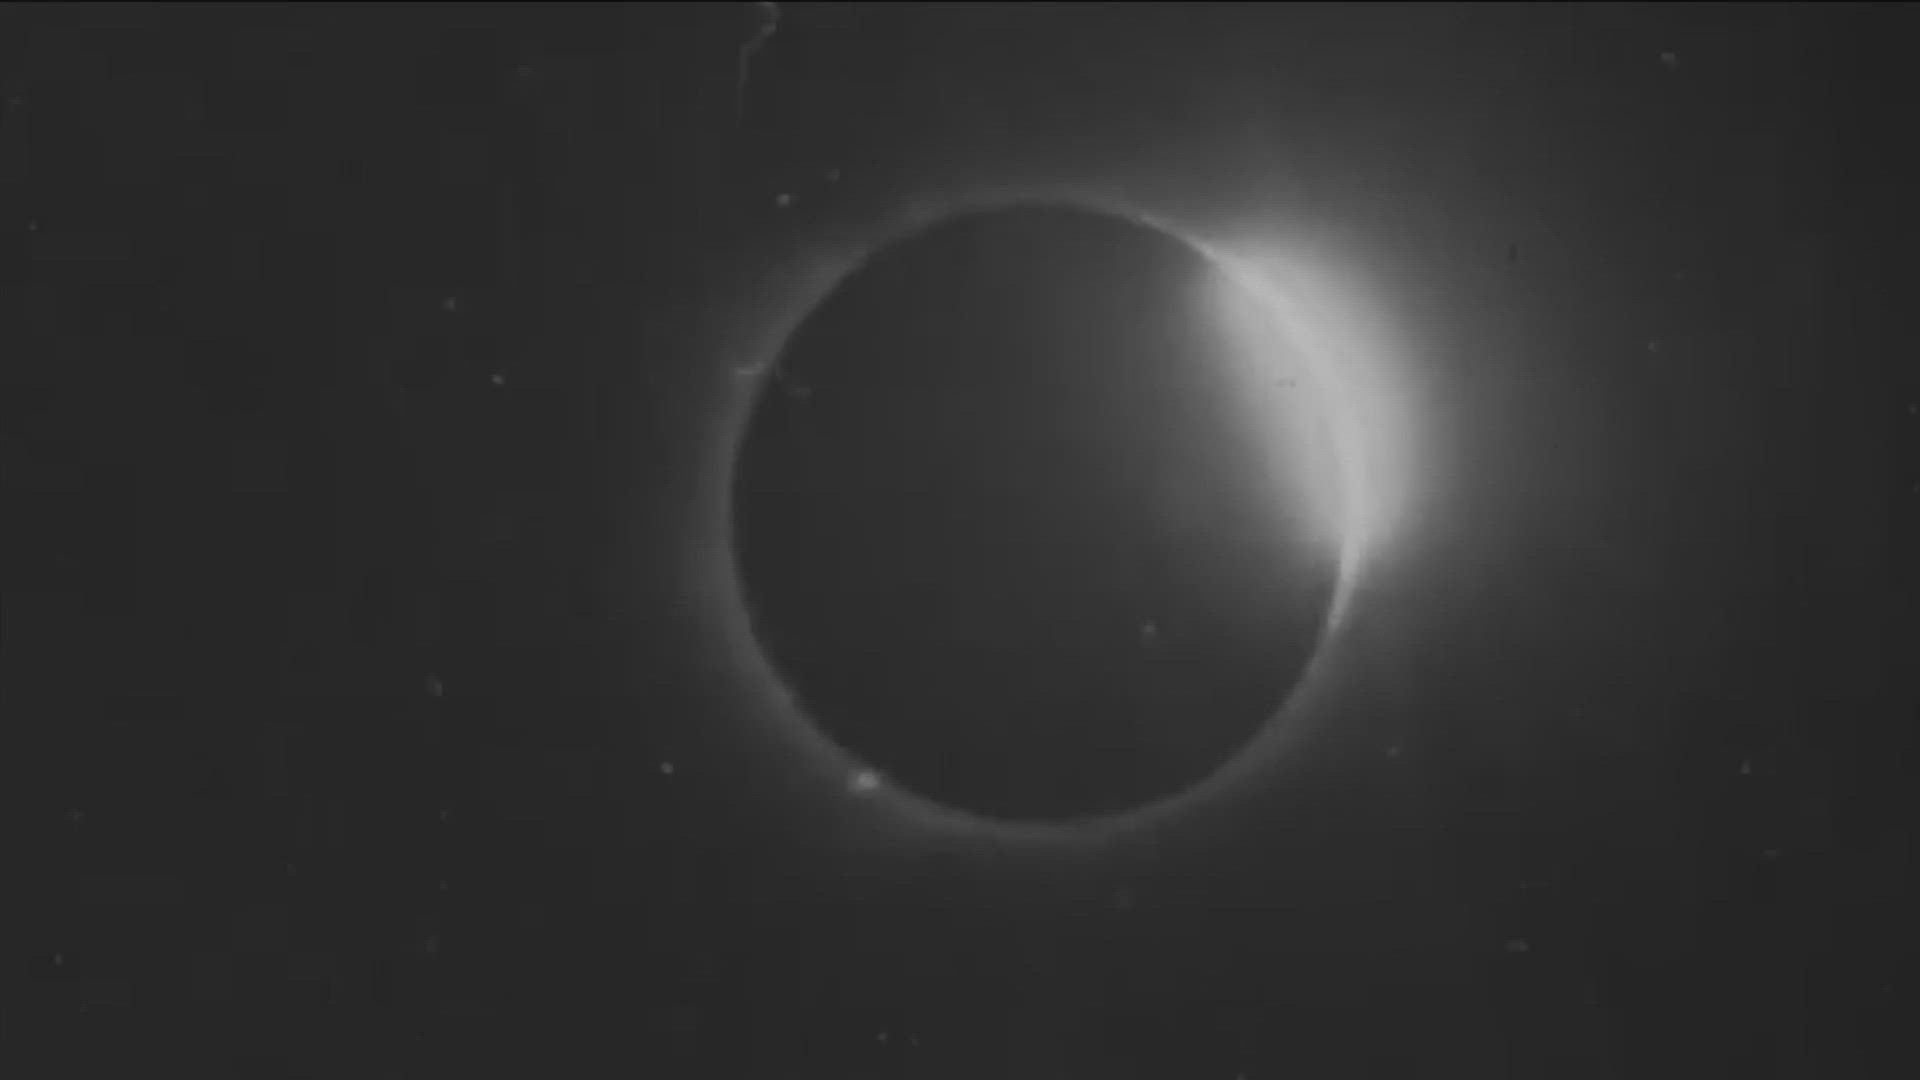 A surprisingly clear and detailed movie film of a solar eclipse in North Carolina was believed to have been lost forever, only to show up again 116 years later.